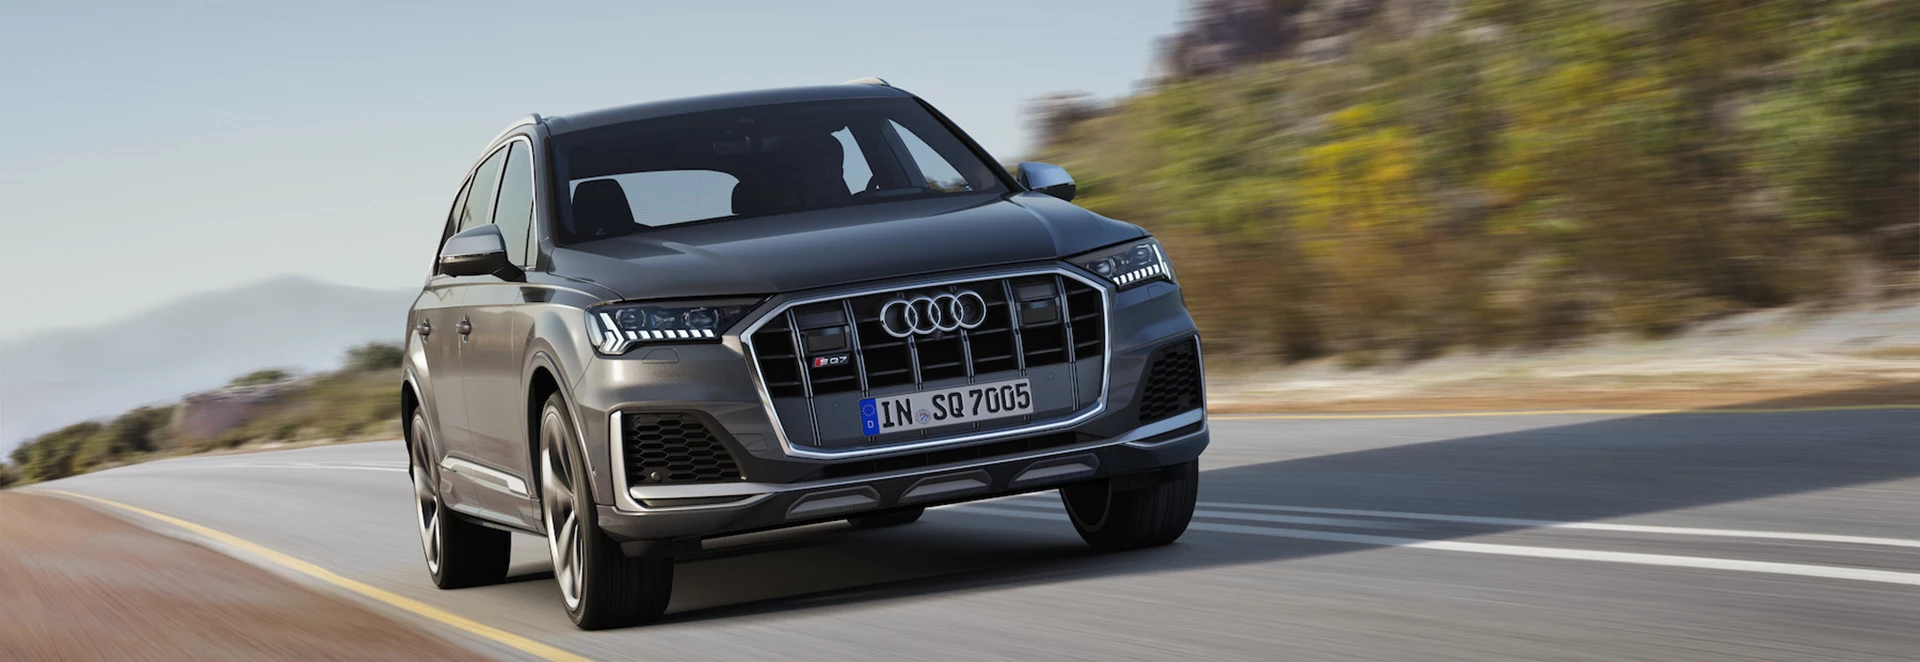 Audi turns up the pace with sporty new SQ7